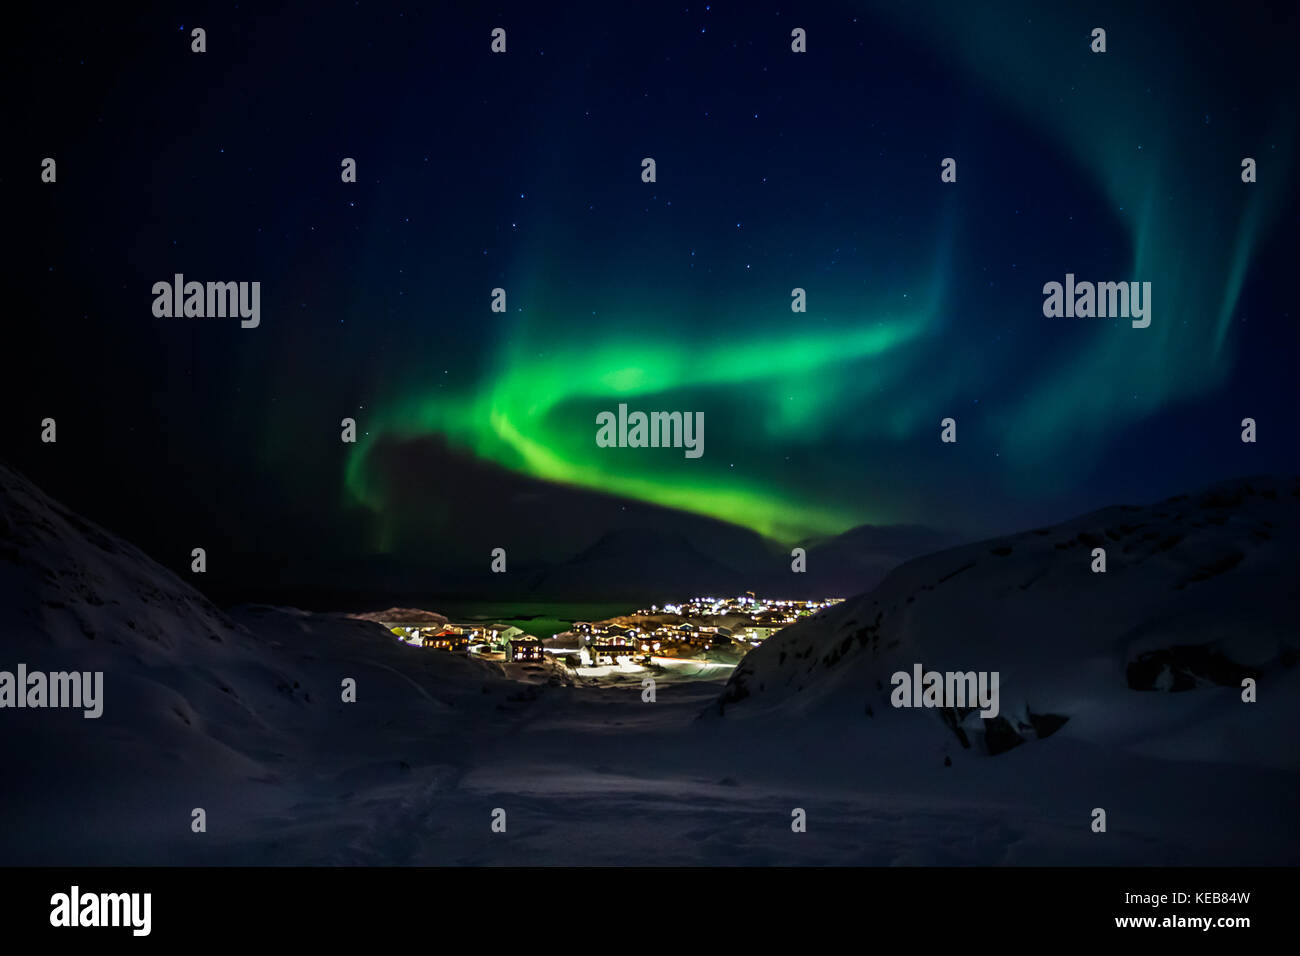 Green lights of Aurora Borealis with shining stars over the mountains and highlighted city, Nuuk, Greenland Stock Photo